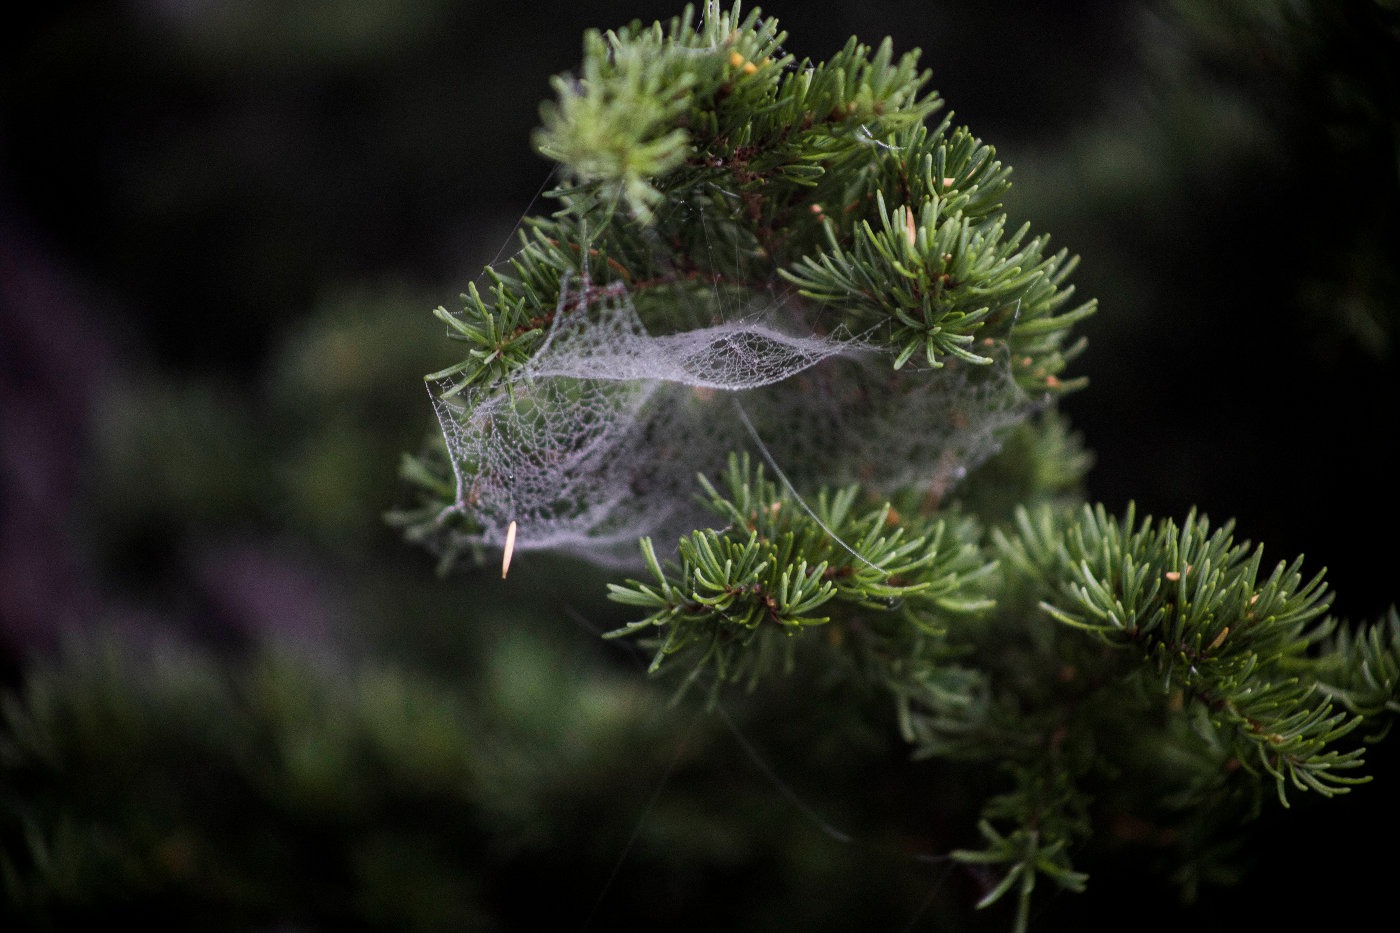 Close up of a web on a pine tree branch